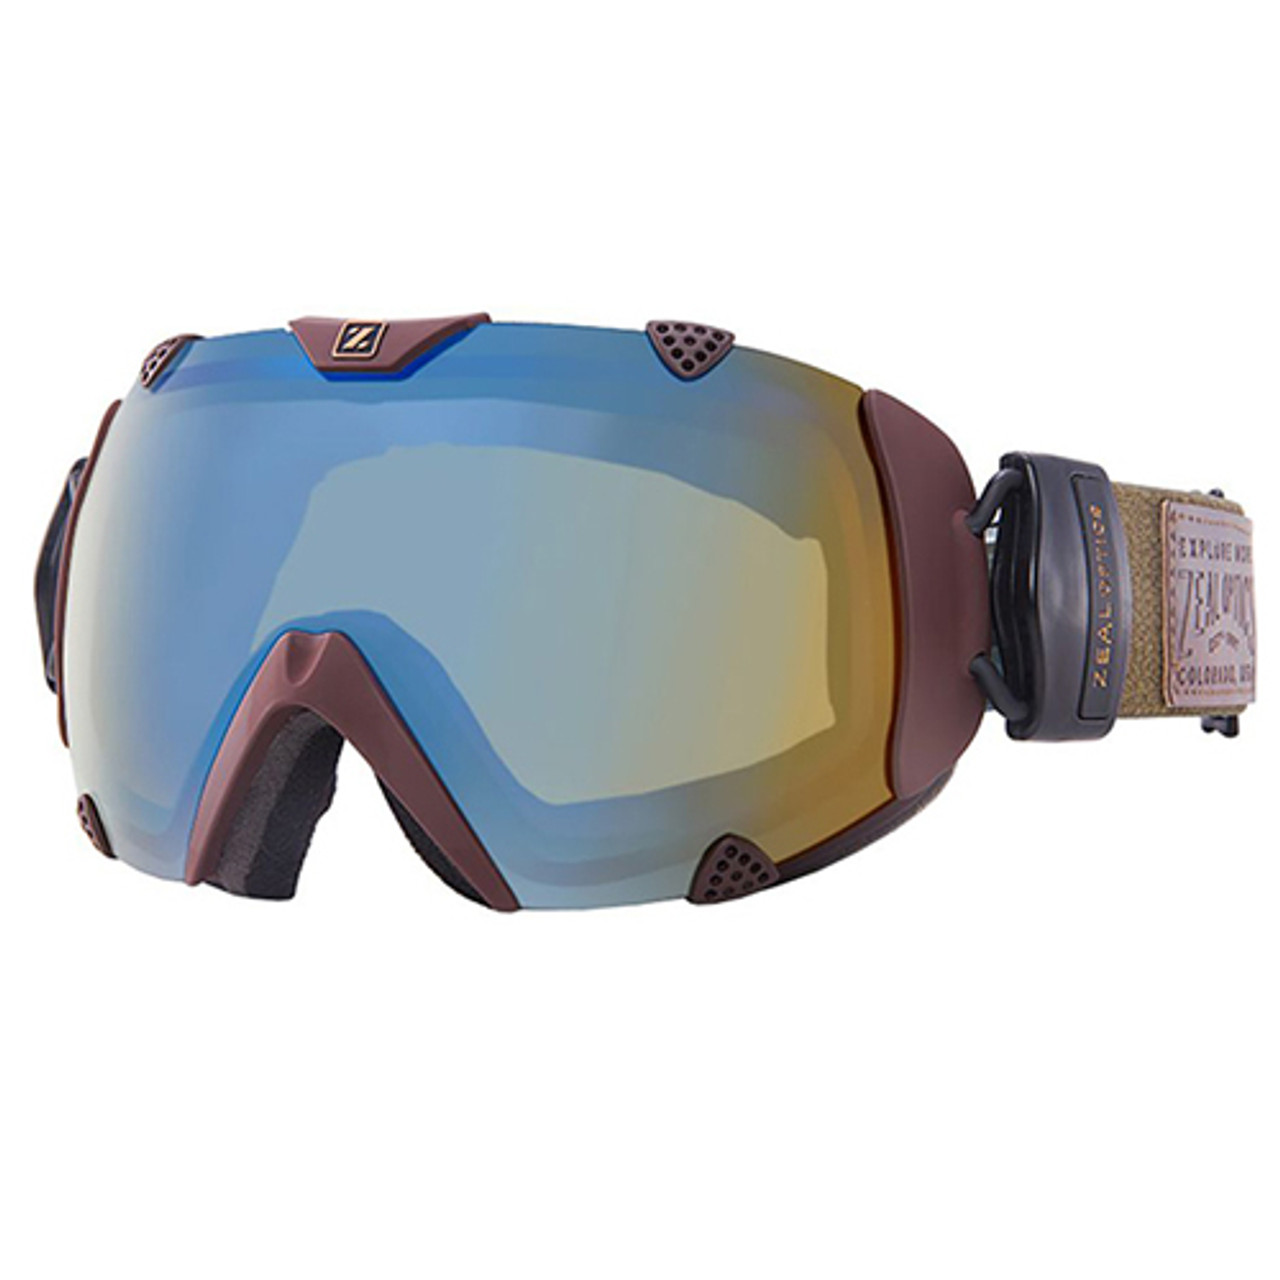 Zeal Eclipse Snow Goggle Replacement Lenses